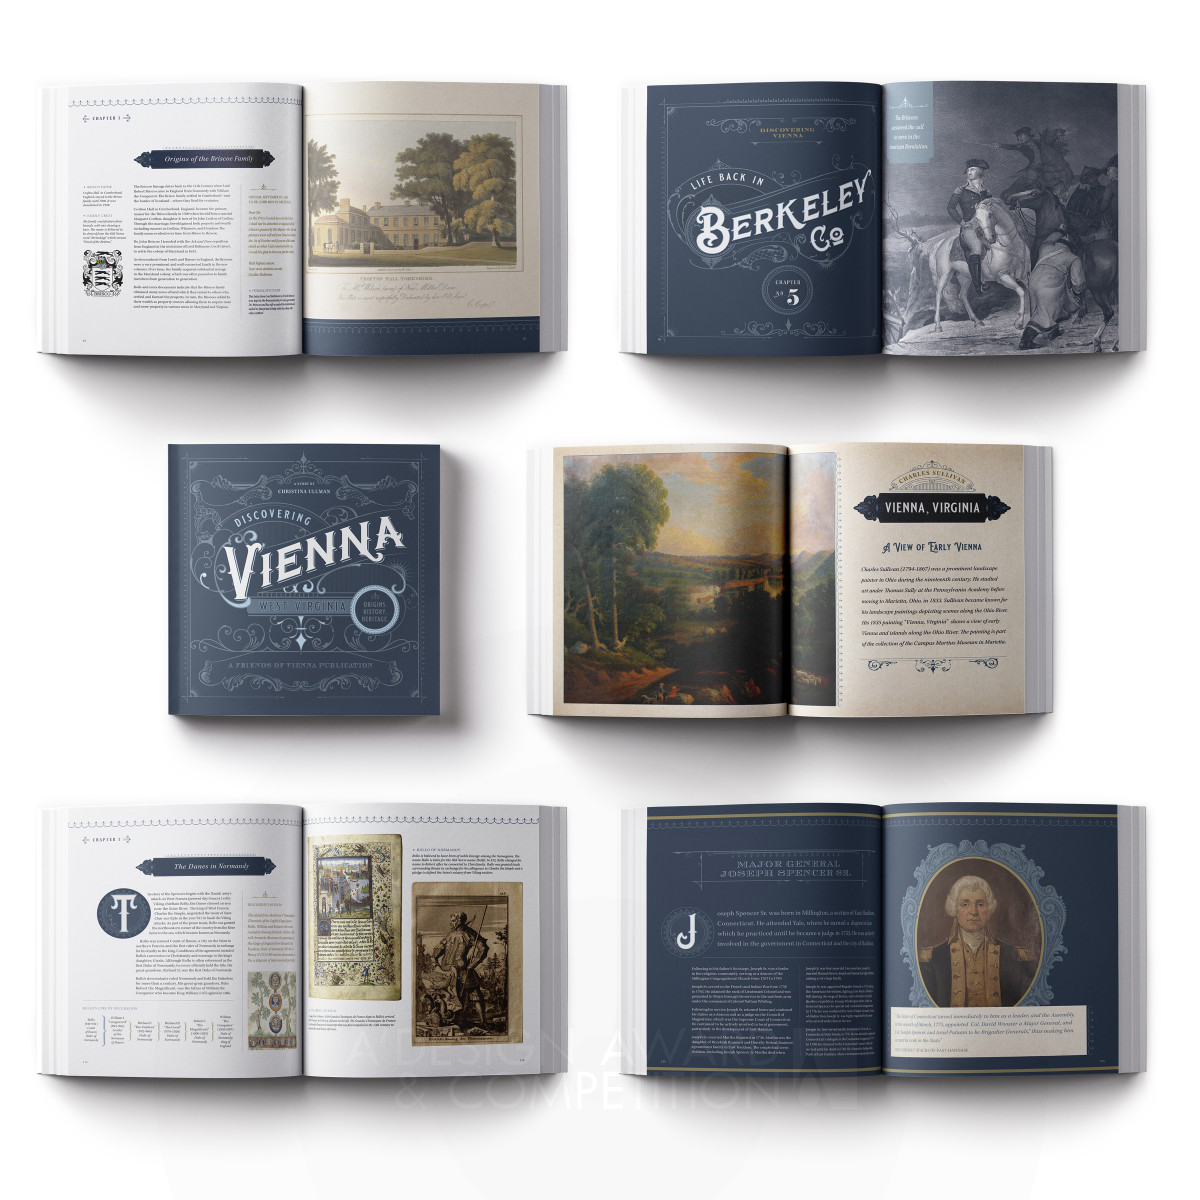 Christina Ullman wins Bronze at the prestigious A' Print and Published Media Design Award with Discovering Vienna Historical Coffee Table Book.